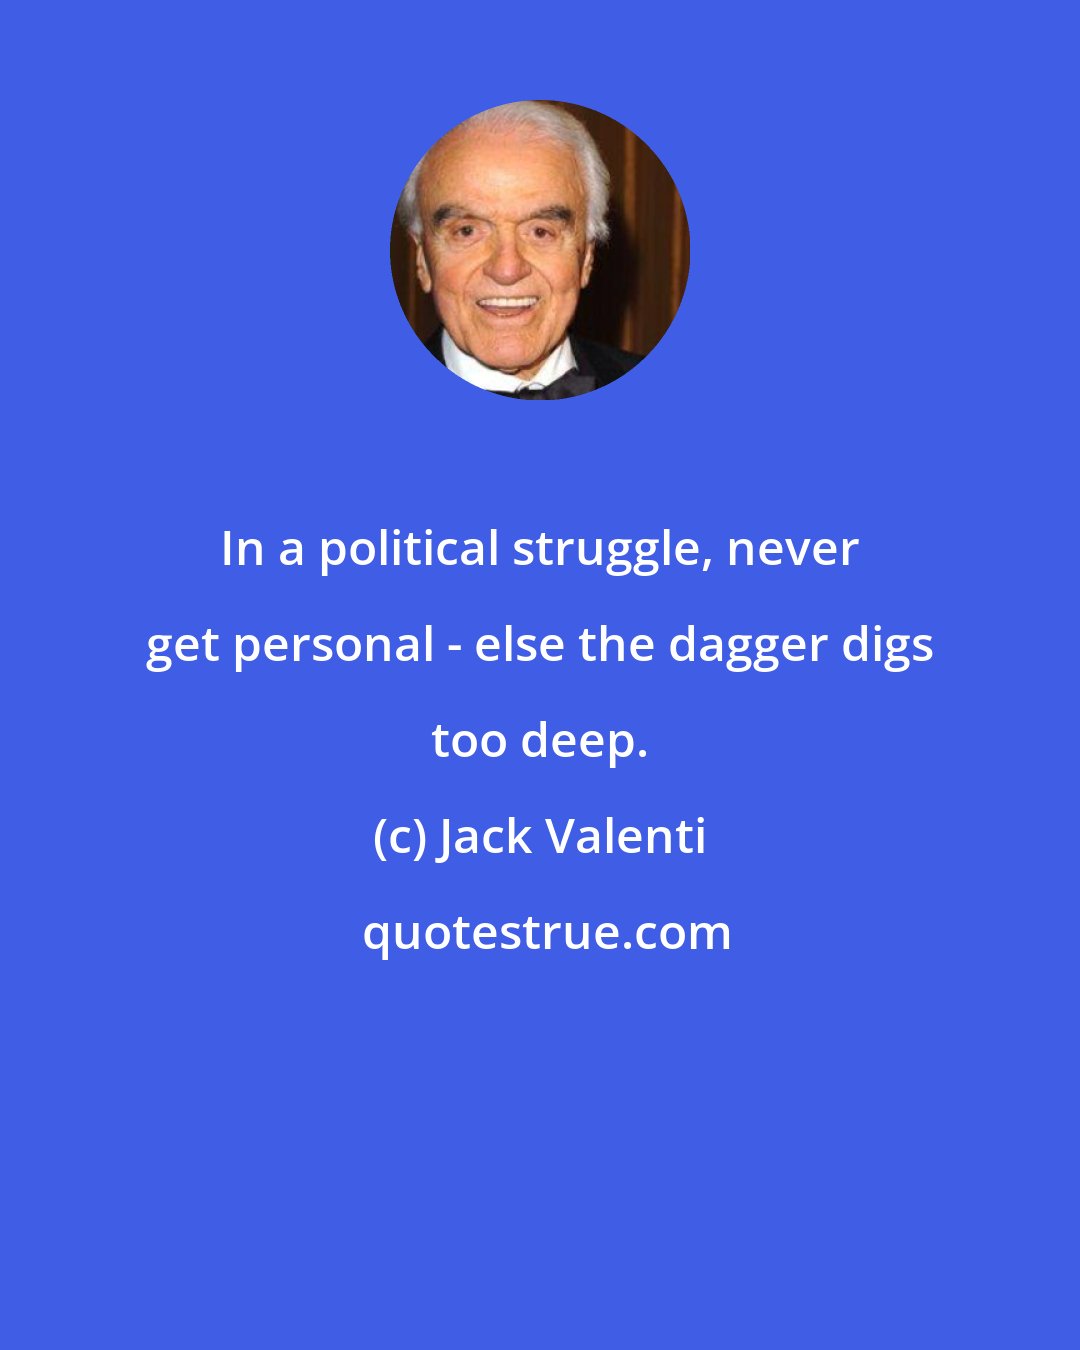 Jack Valenti: In a political struggle, never get personal - else the dagger digs too deep.